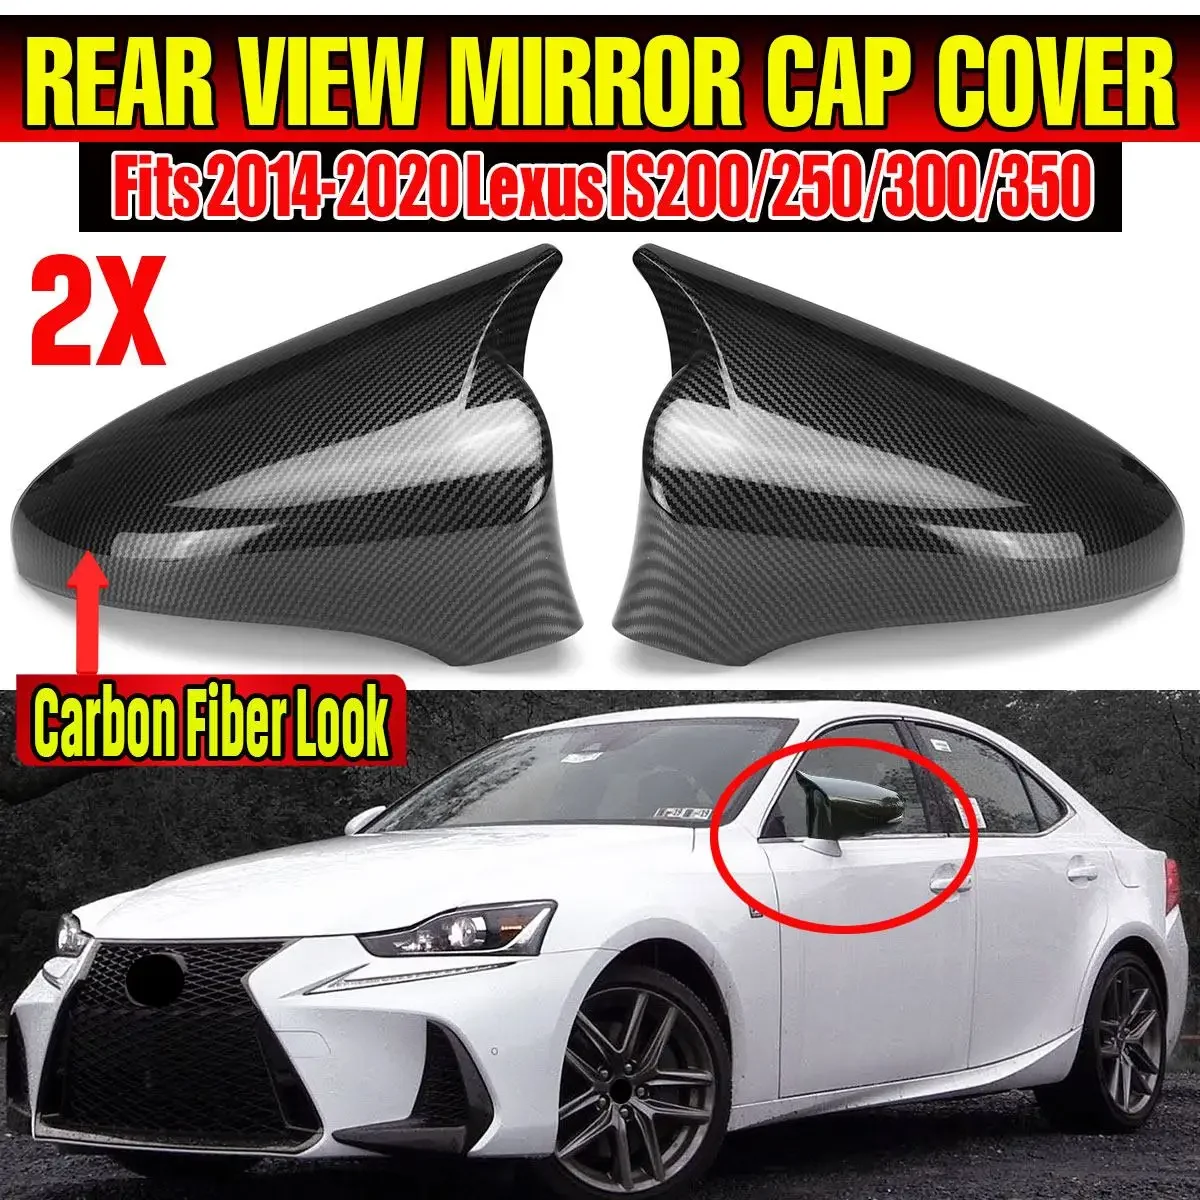 

2pcs Car Rear View Mirror Cover Cap For Lexus IS200 250 300 350 2014-2020 Side Wing Rearview Mirror Cover Cap Shell Case Trim